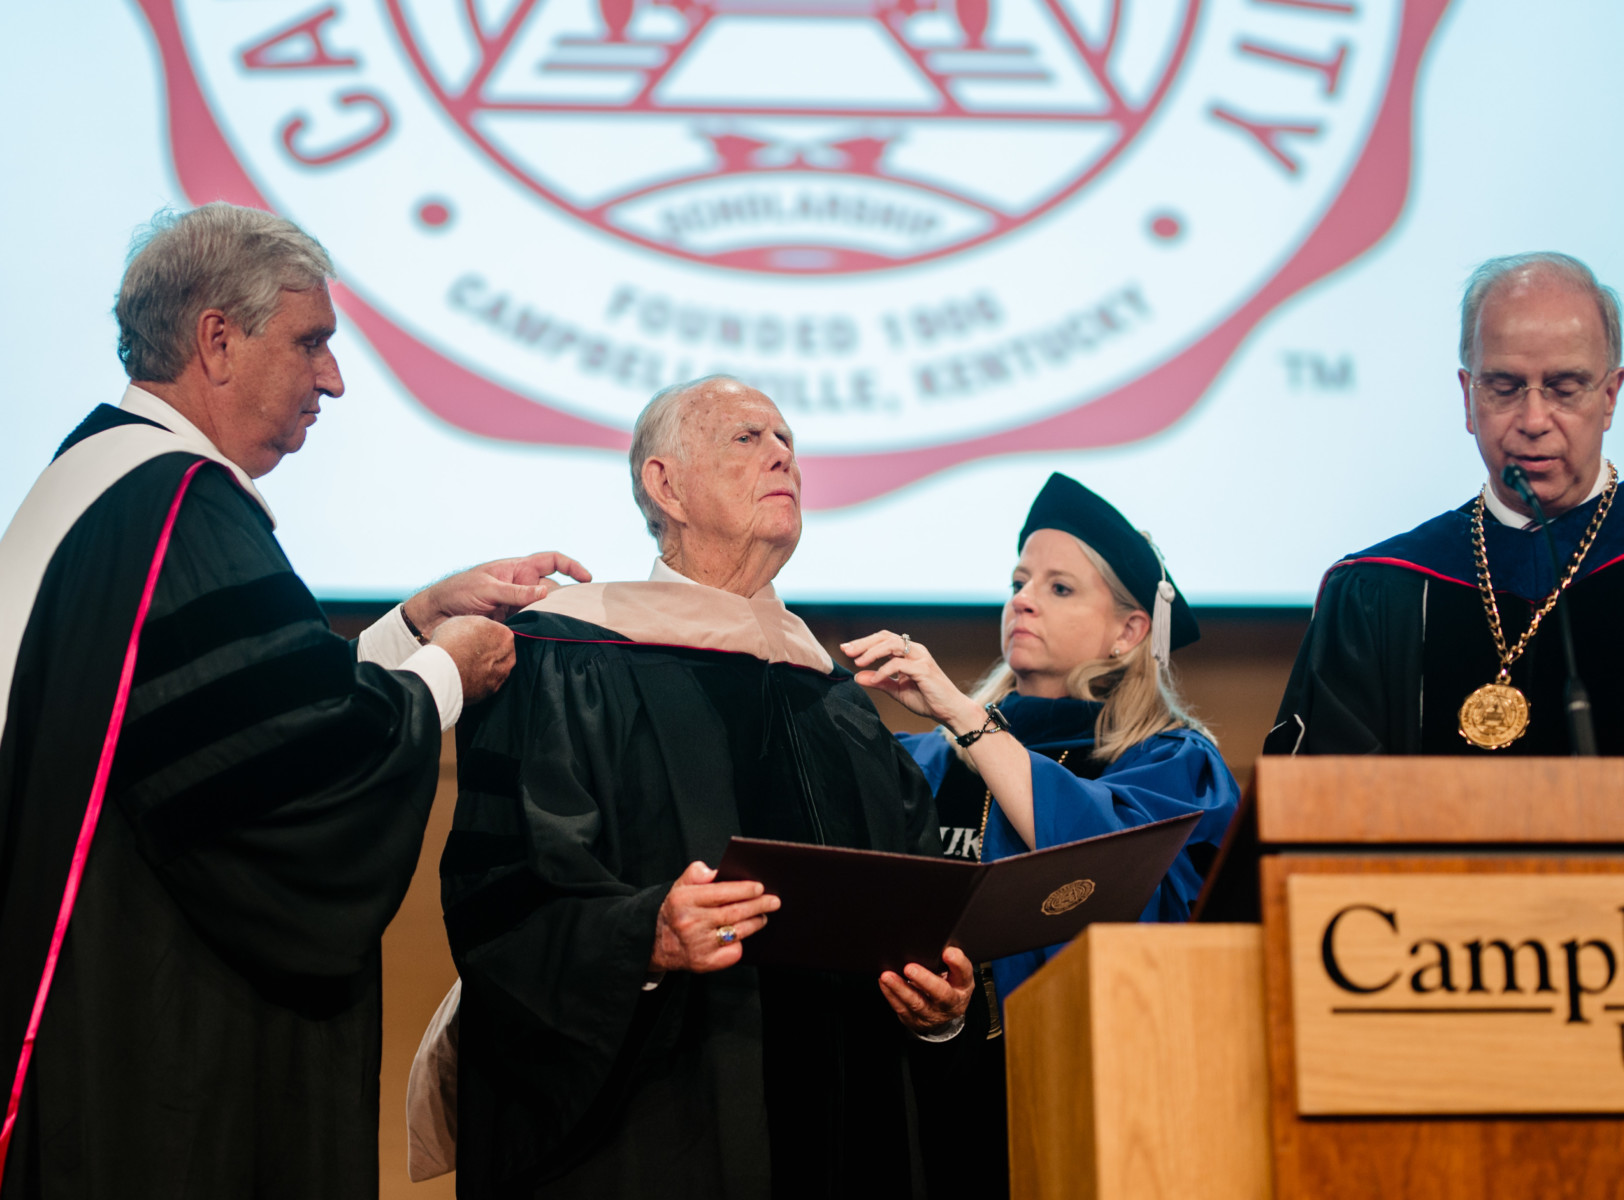 Elizabethtown resident, Roy Rich, receives honorary doctorate at Campbellsville University commencement